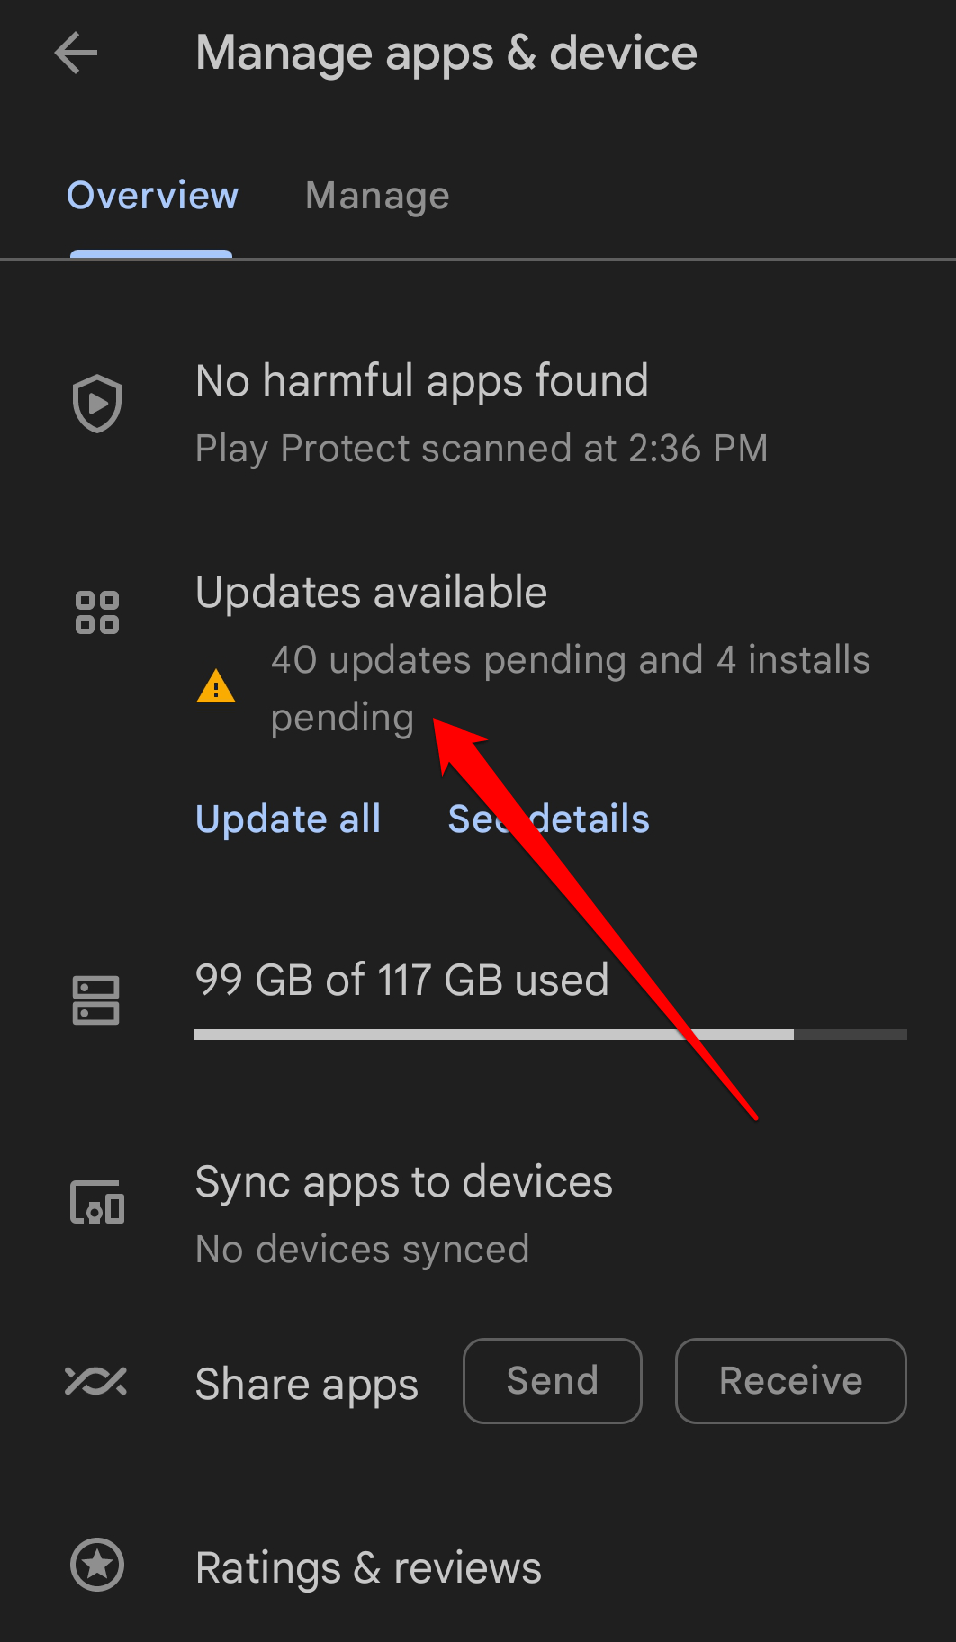 Select the "Updates available" option.